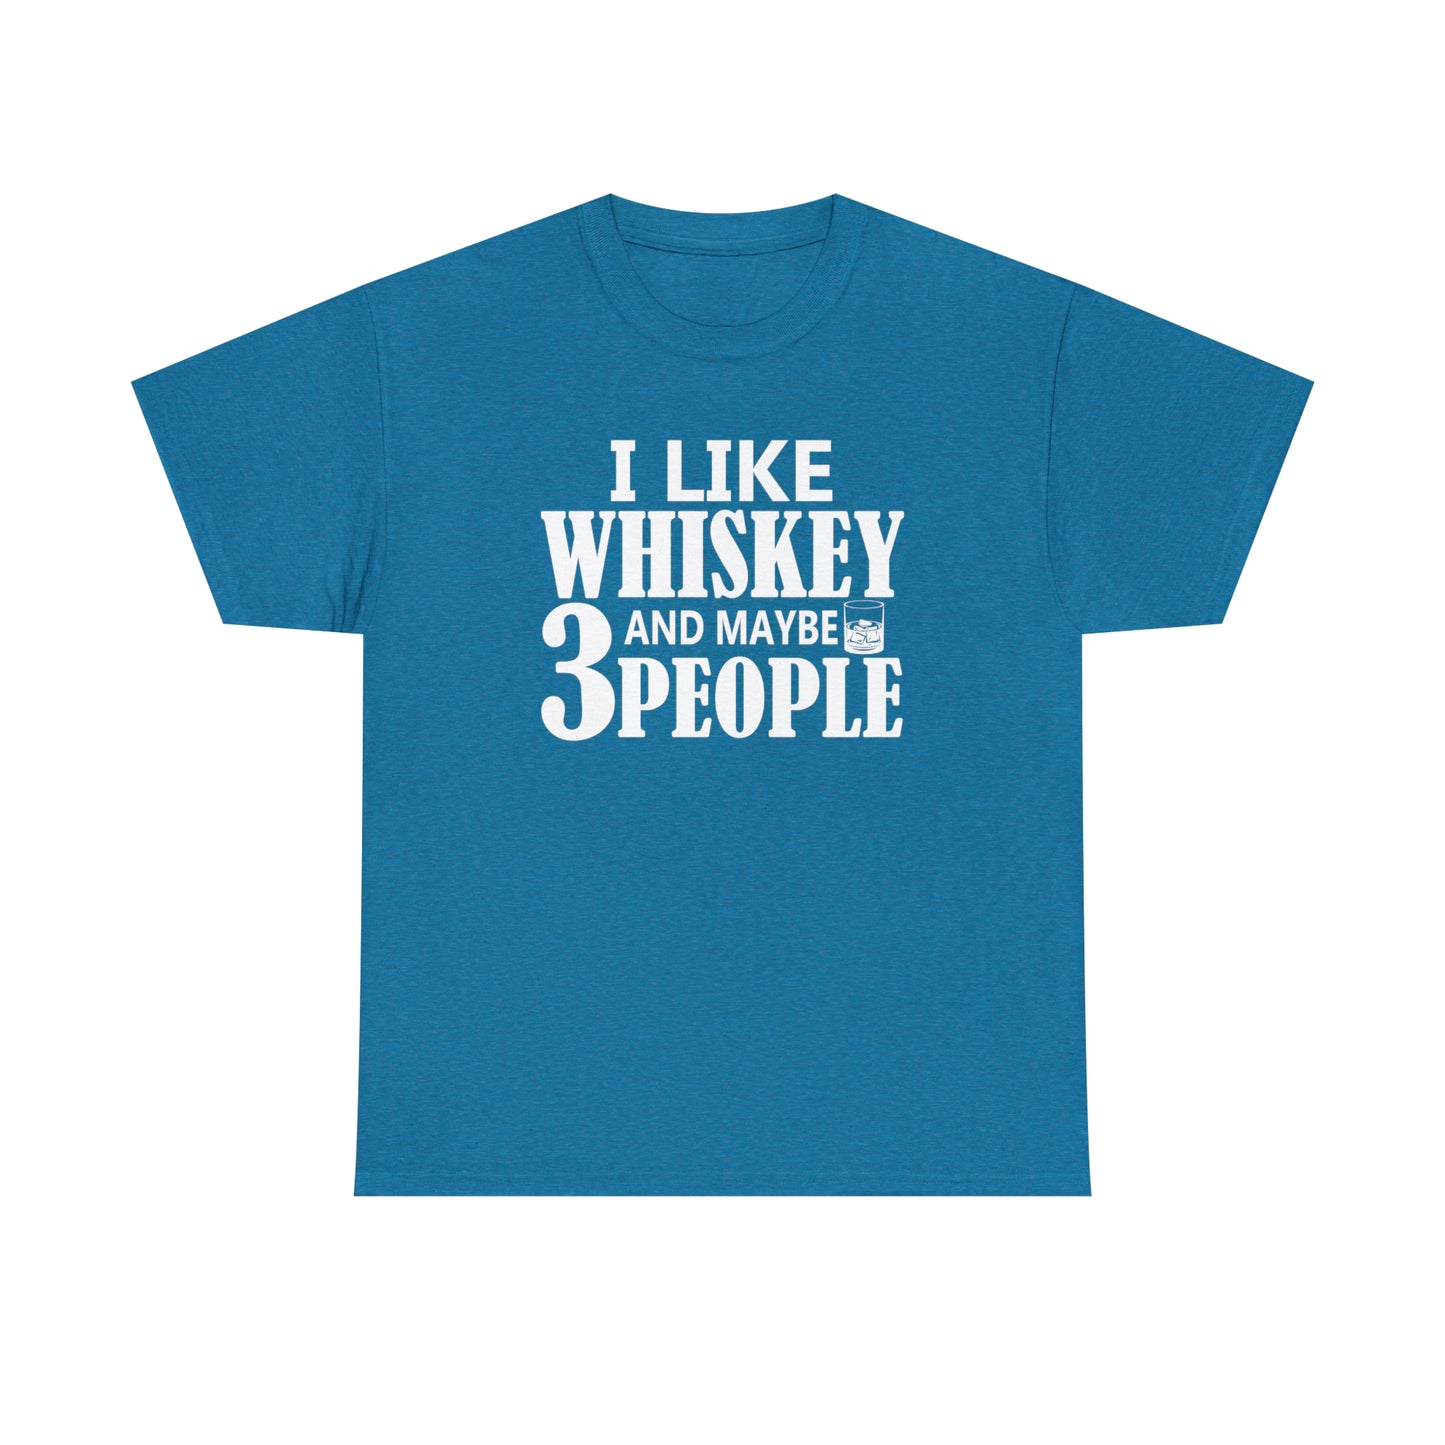 Classic fit t-shirt perfect for whiskey enthusiasts with a sense of humor.